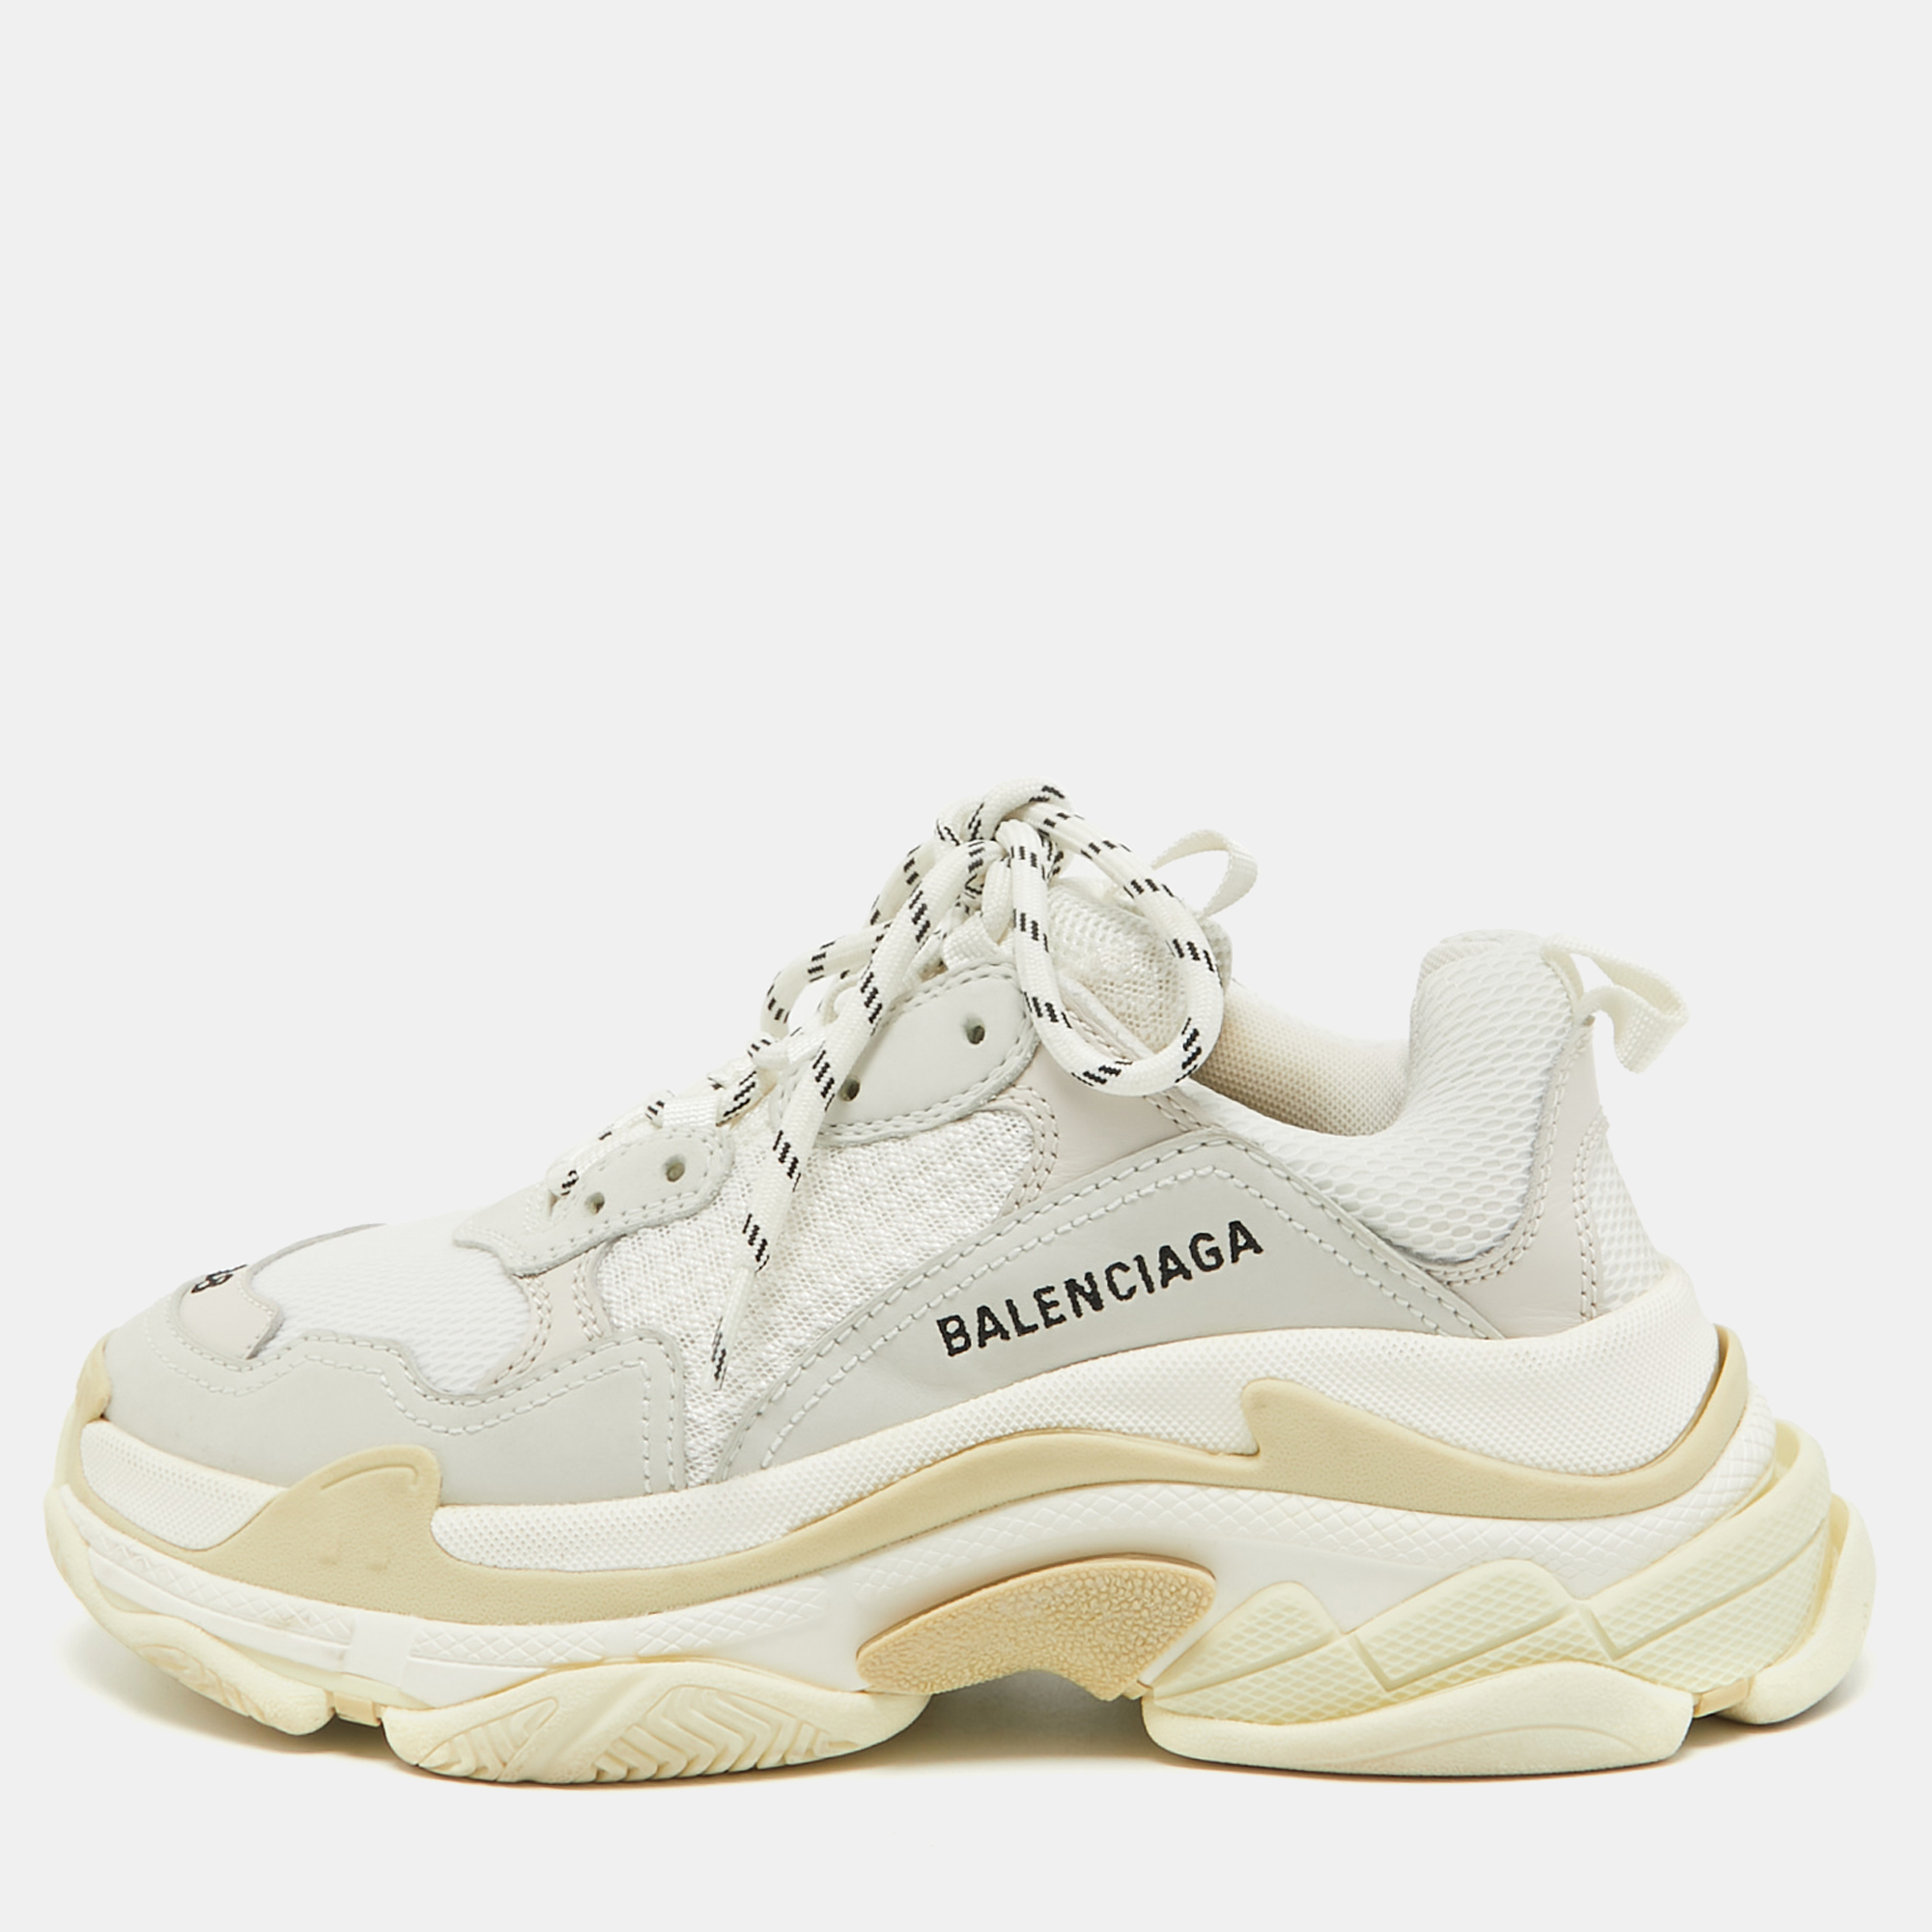 Pre-owned Balenciaga White/grey Leather And Mesh Triple S Sneakers Size 38